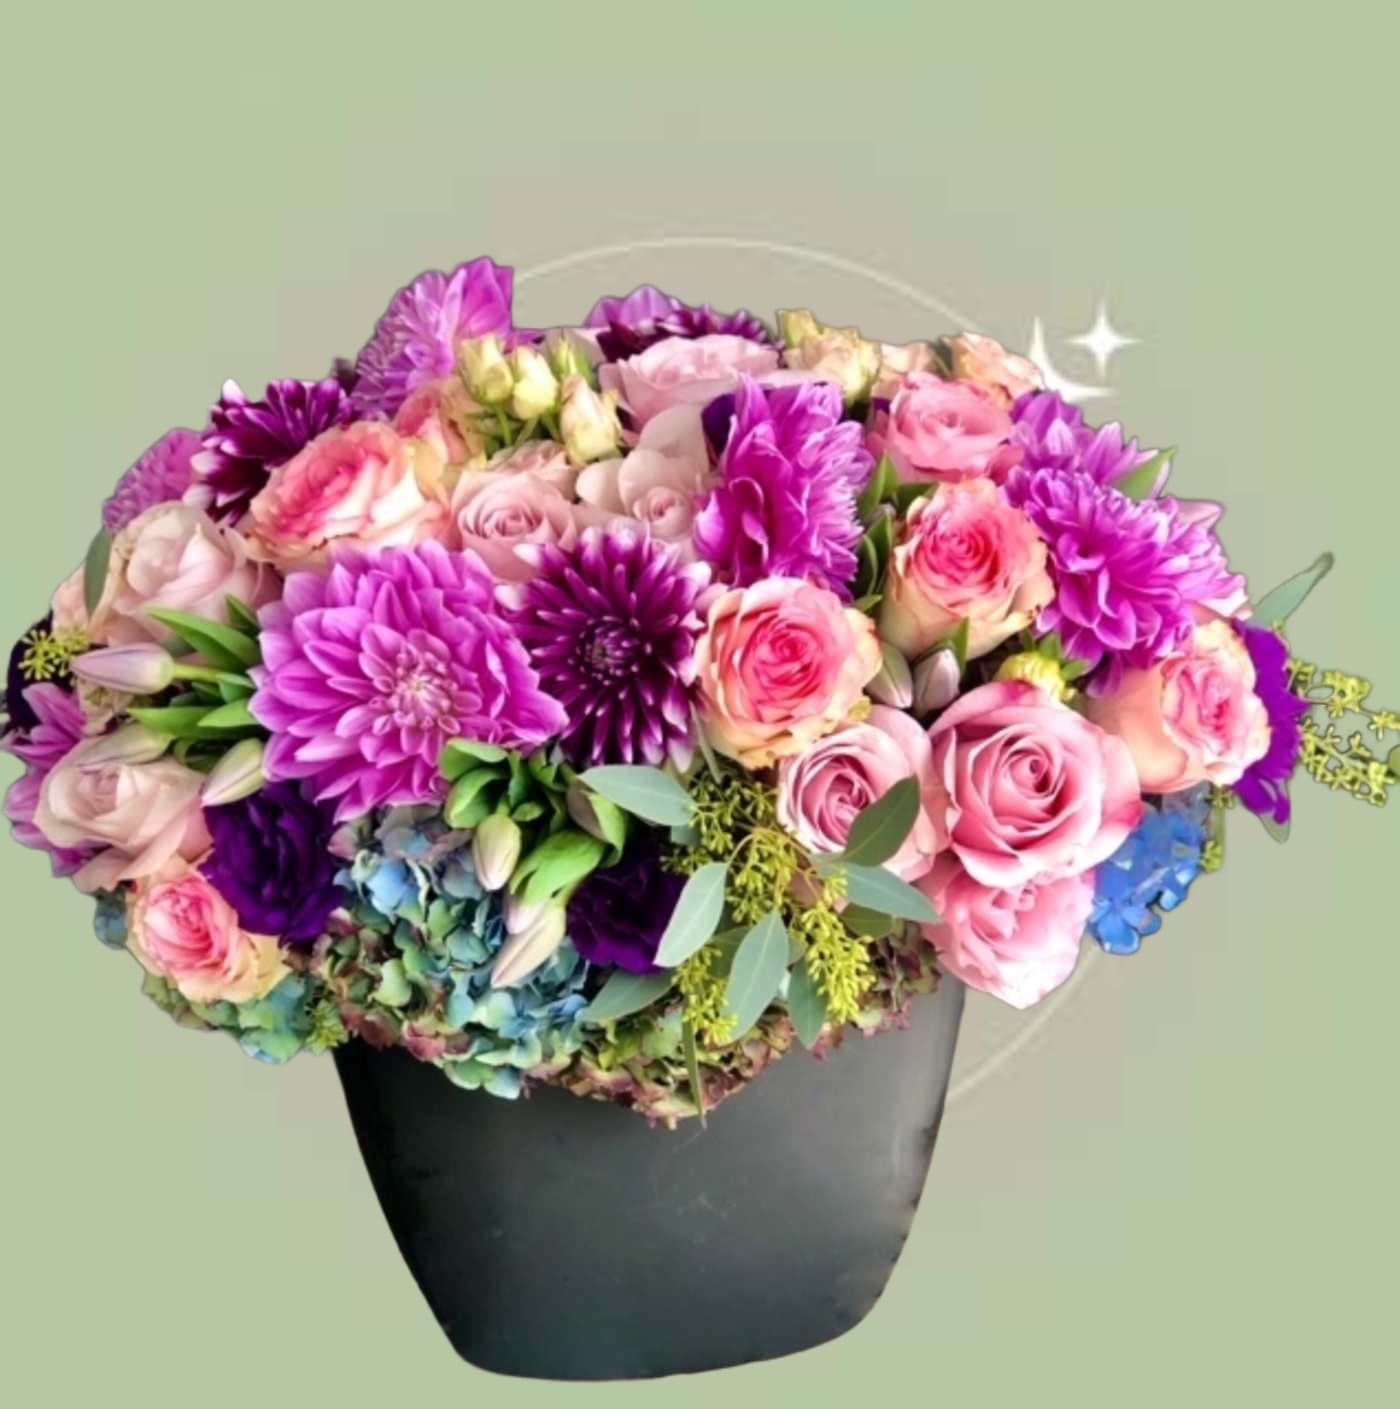 Burst of Springtime - PLEASE NOTE: Although we make all the effort to create a floral arrangement as close to the photo shown, the actual arrangement delivered may vary slightly in its appearance from the photo shown. If you have any questions about your order, we welcome you to call us in or email us to discuss further. Thank you!